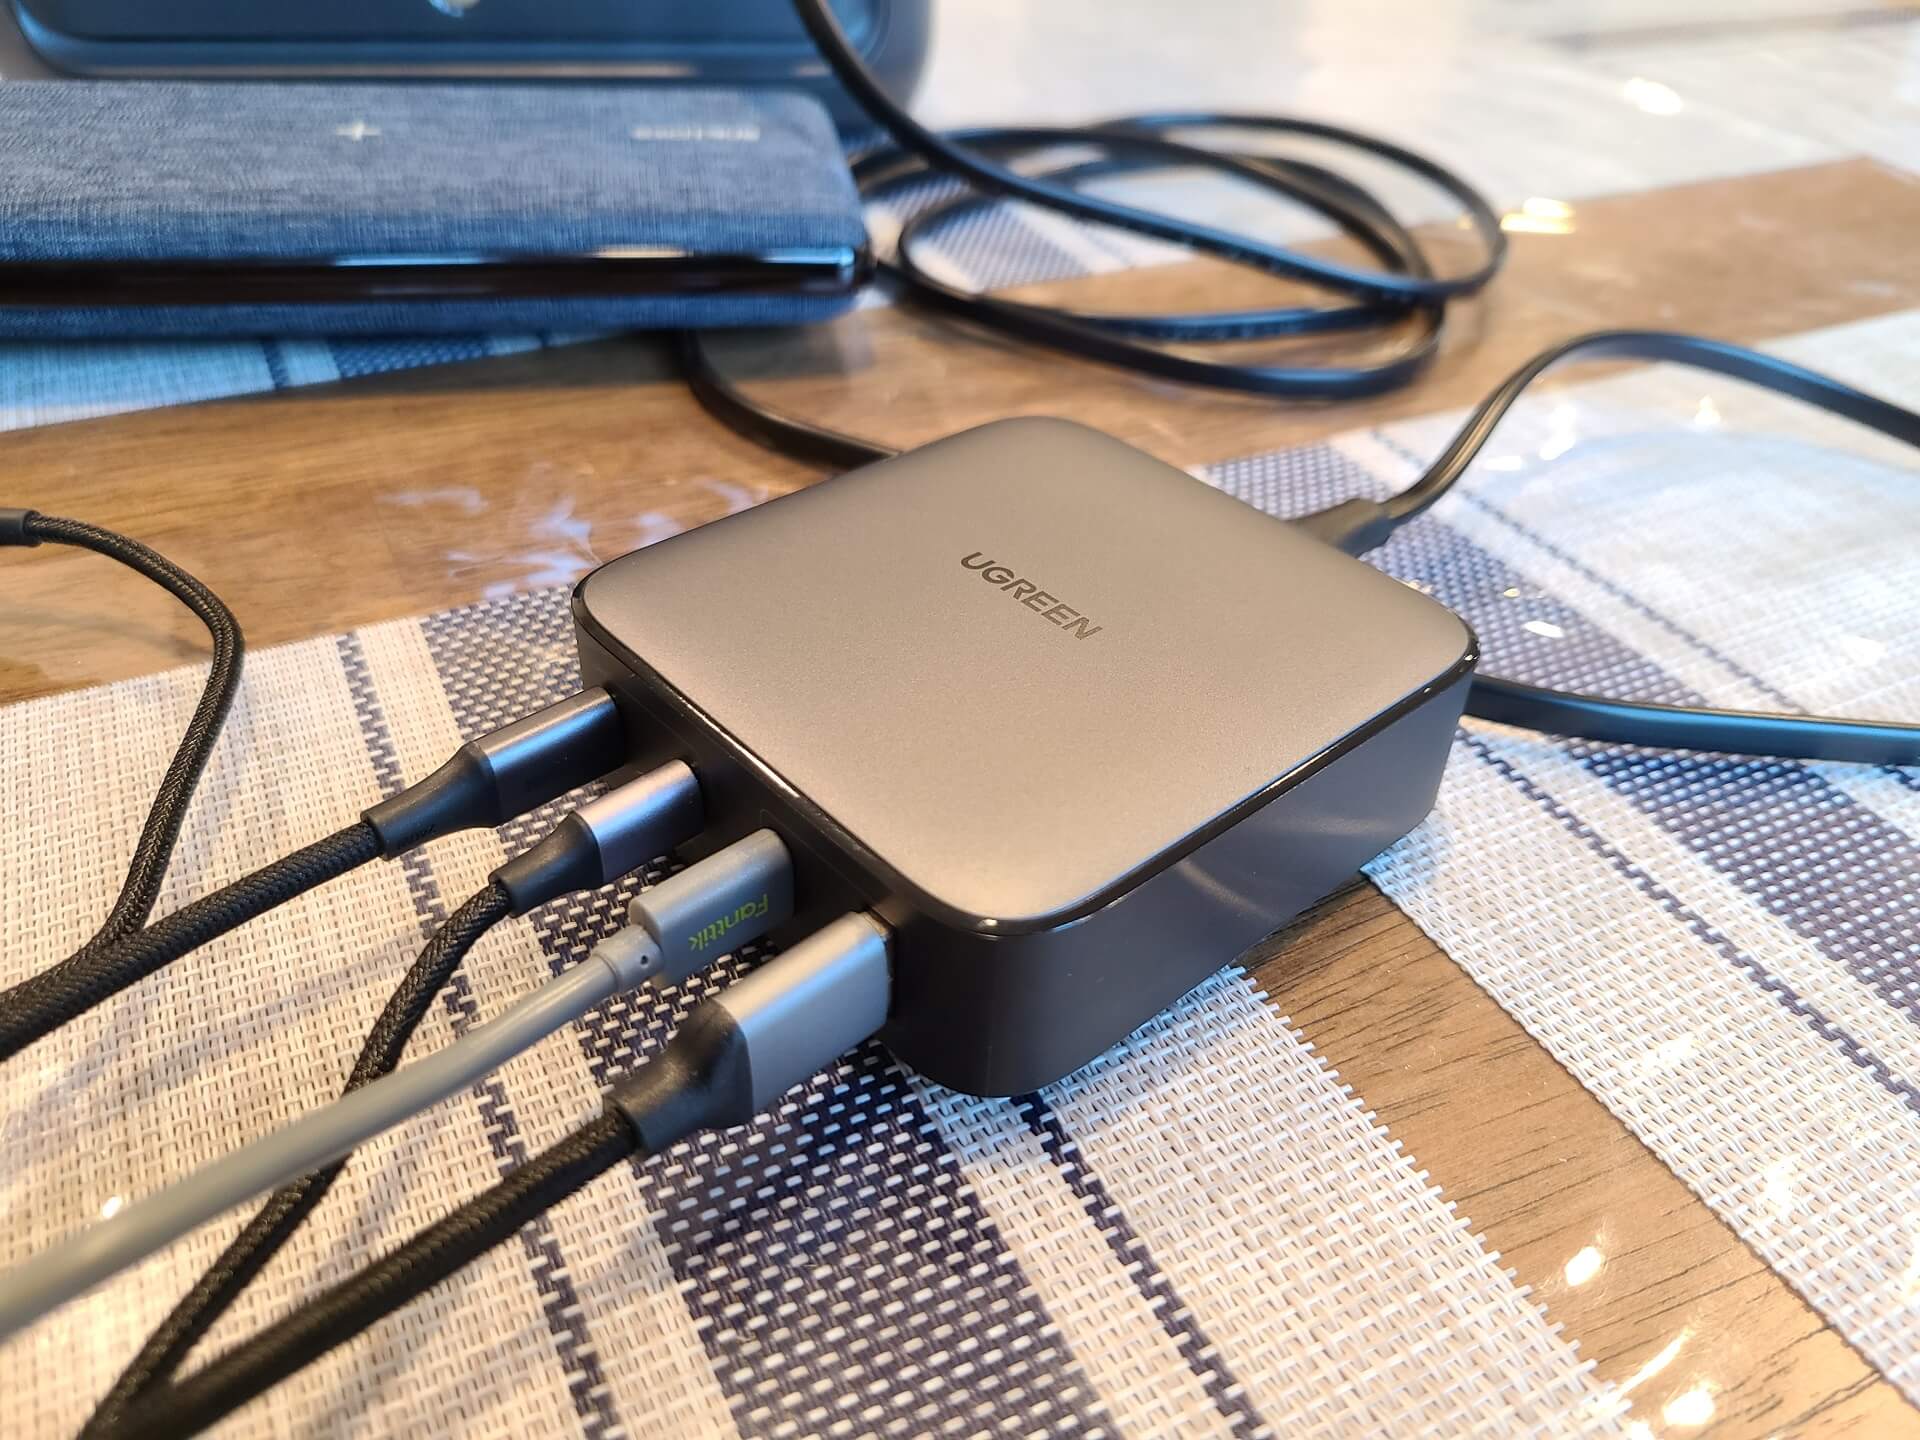 UGREEN 100W GAN CHARGER: THIS CAN POWER YOUR LAPTOP! (AND OTHER DEVICES  TOO) 